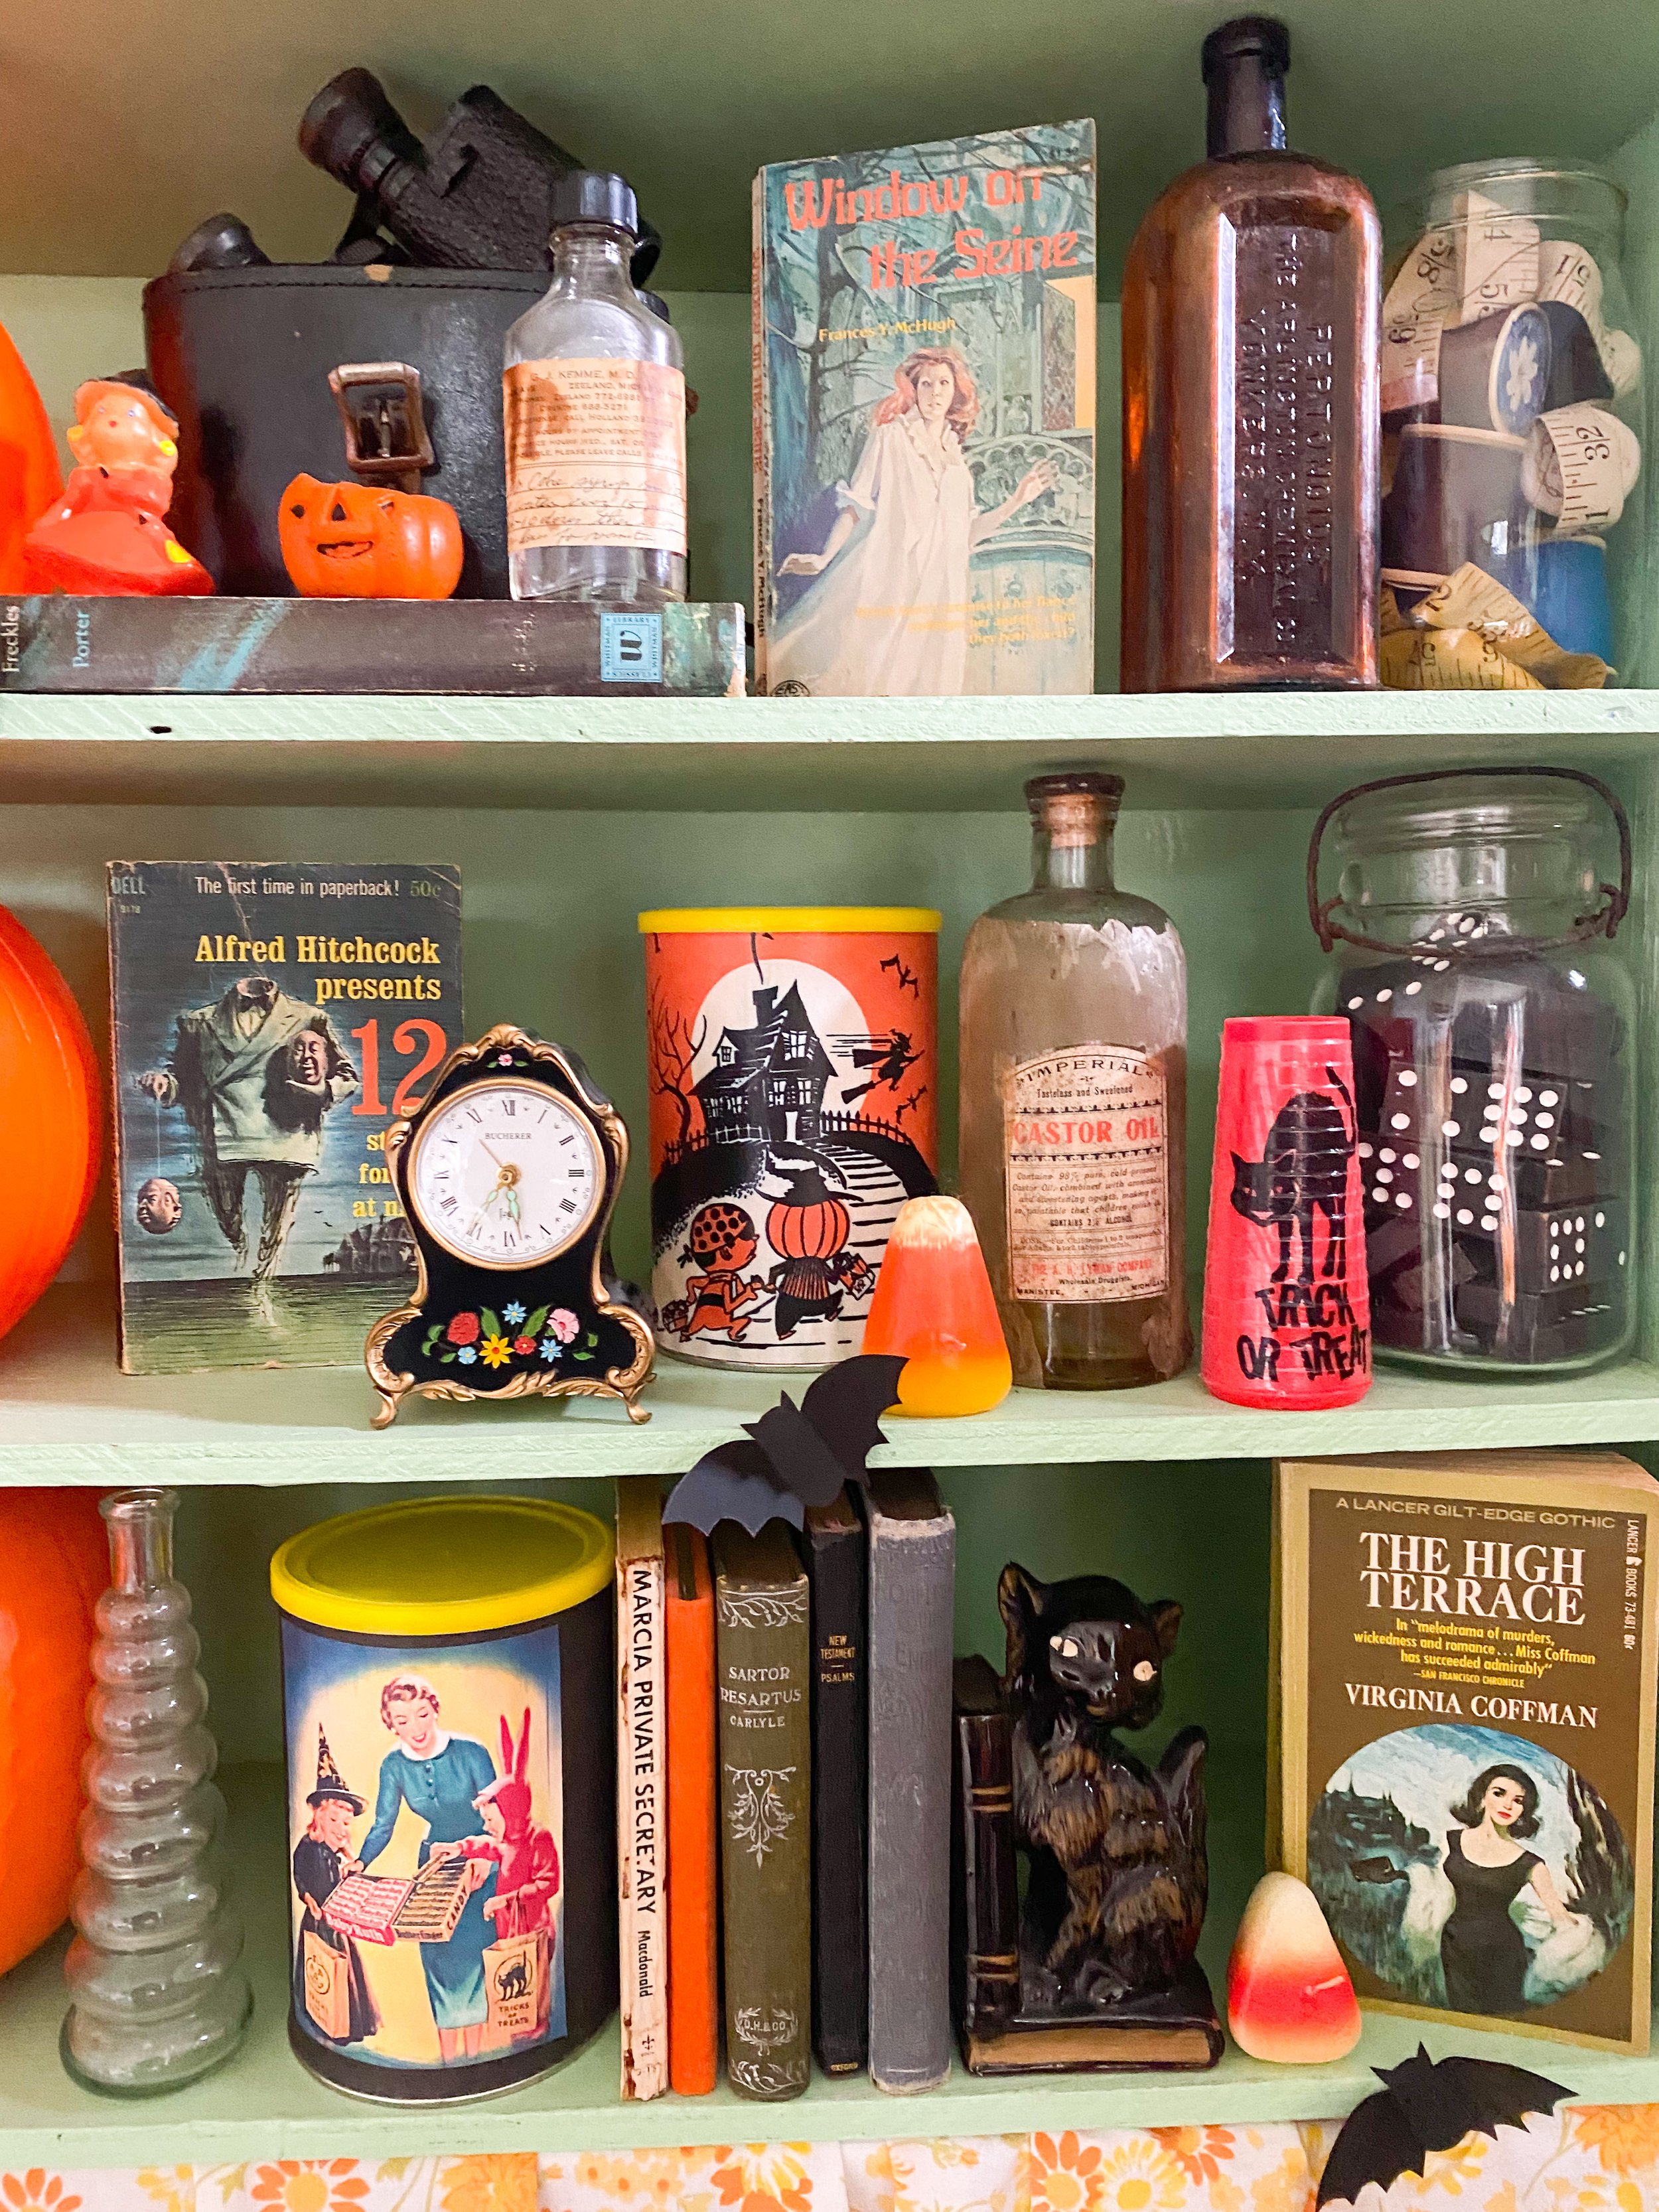 More new shelves! Displayed some of my smaller favorite Halloween